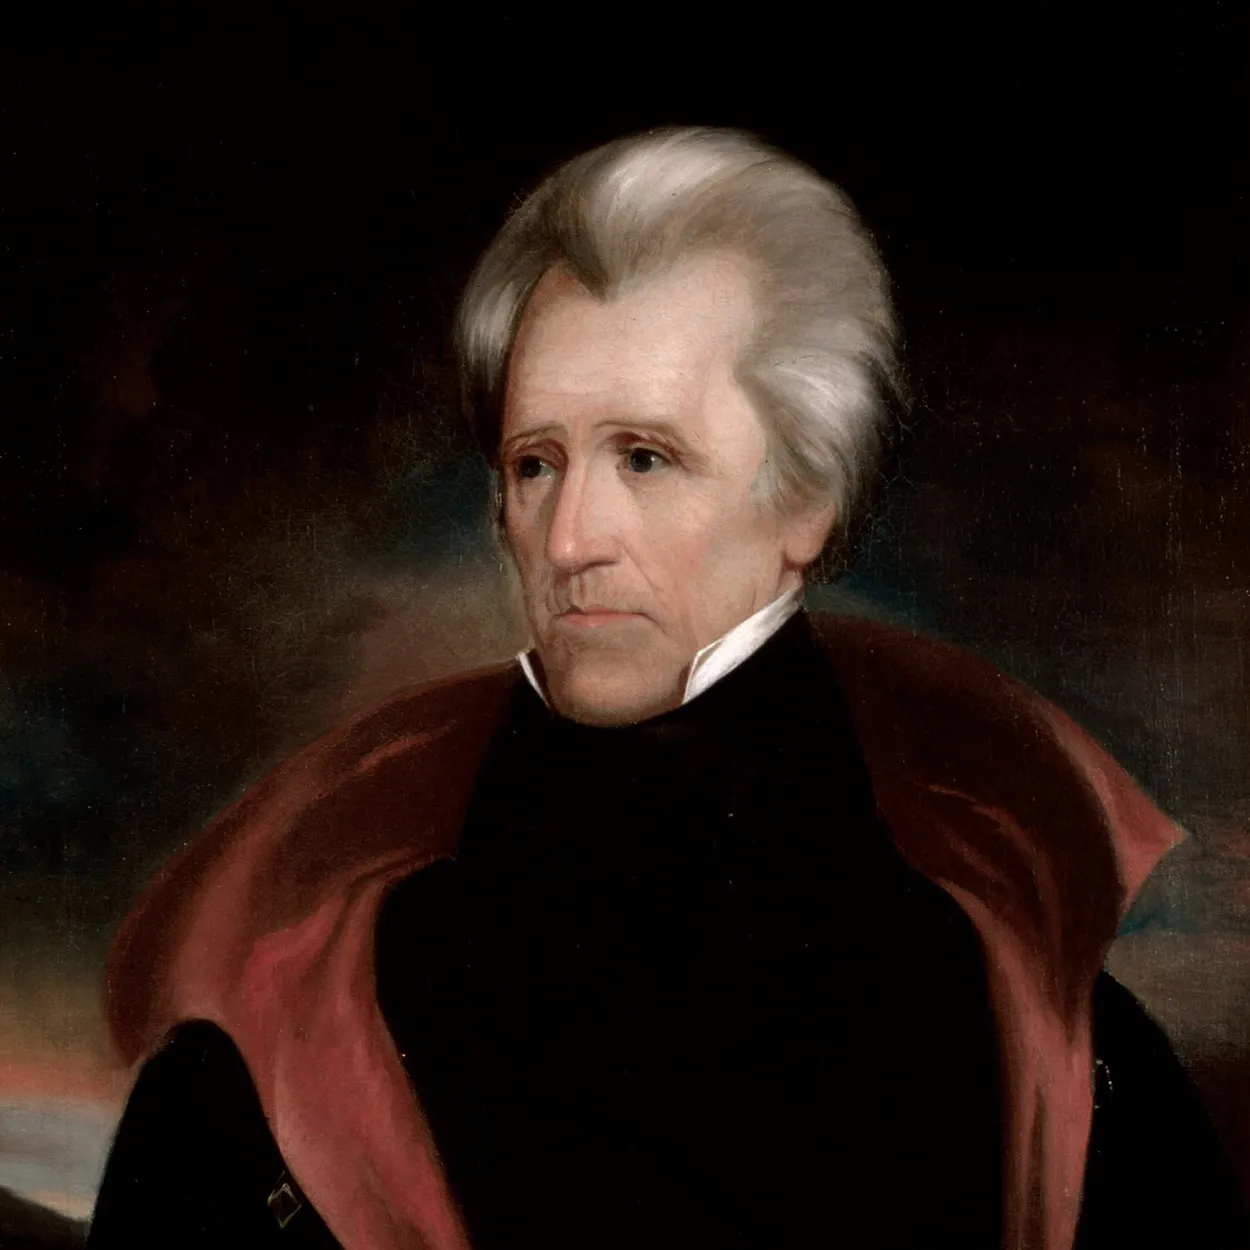 Andrew Jackson - A Controversial American President